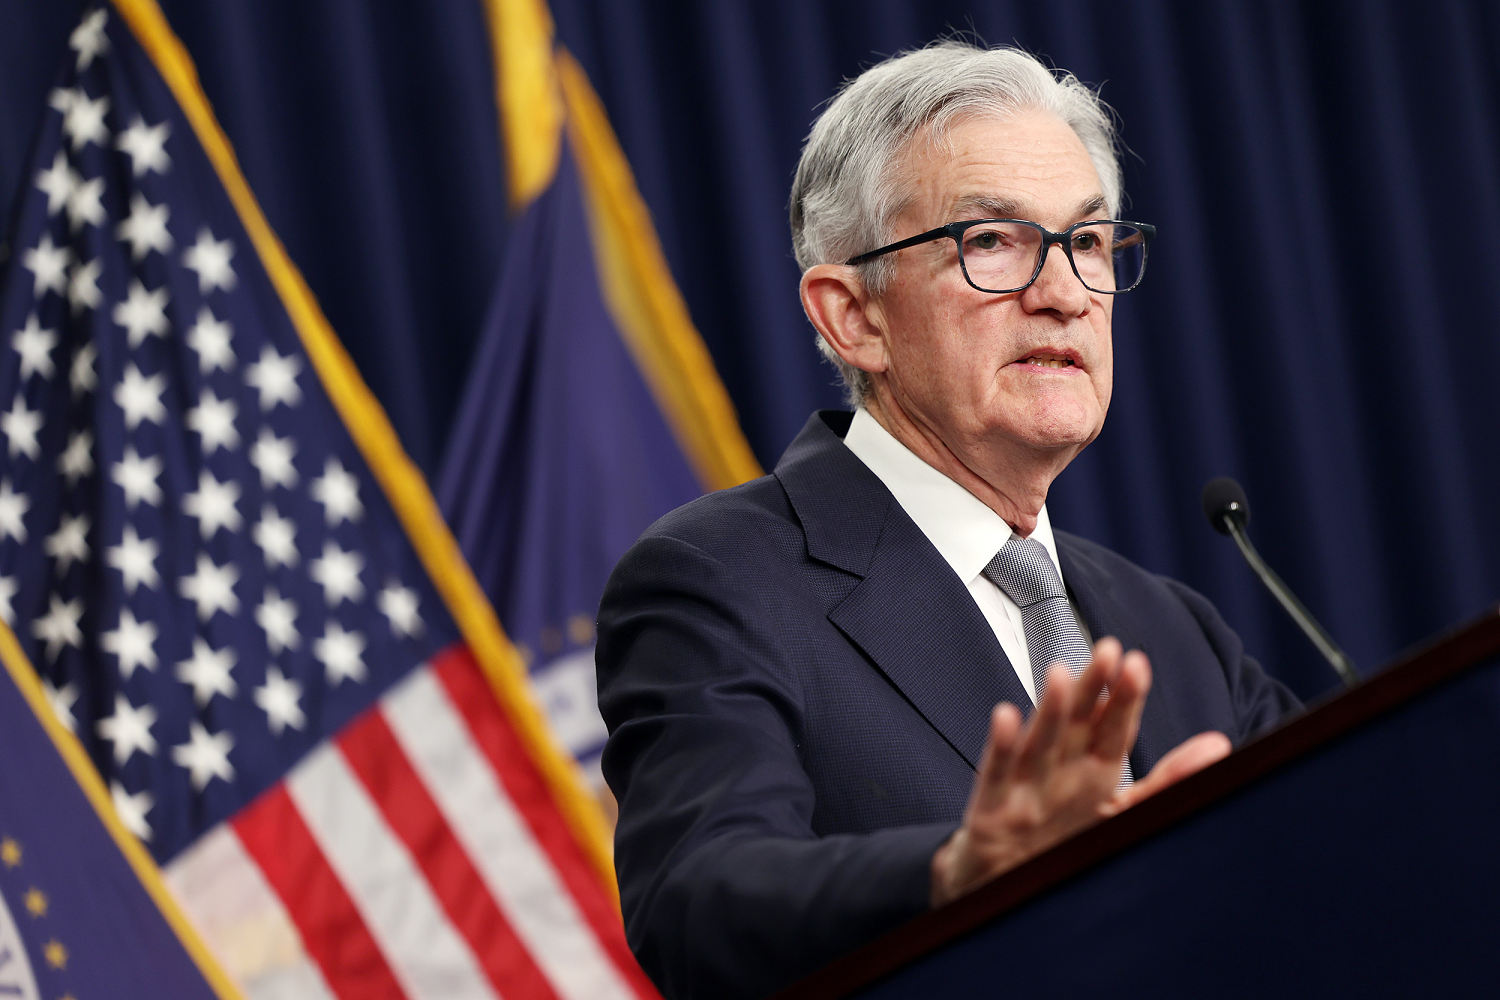 Federal Reserve holds interest rates steady as consumer confidence improves and inflation slows